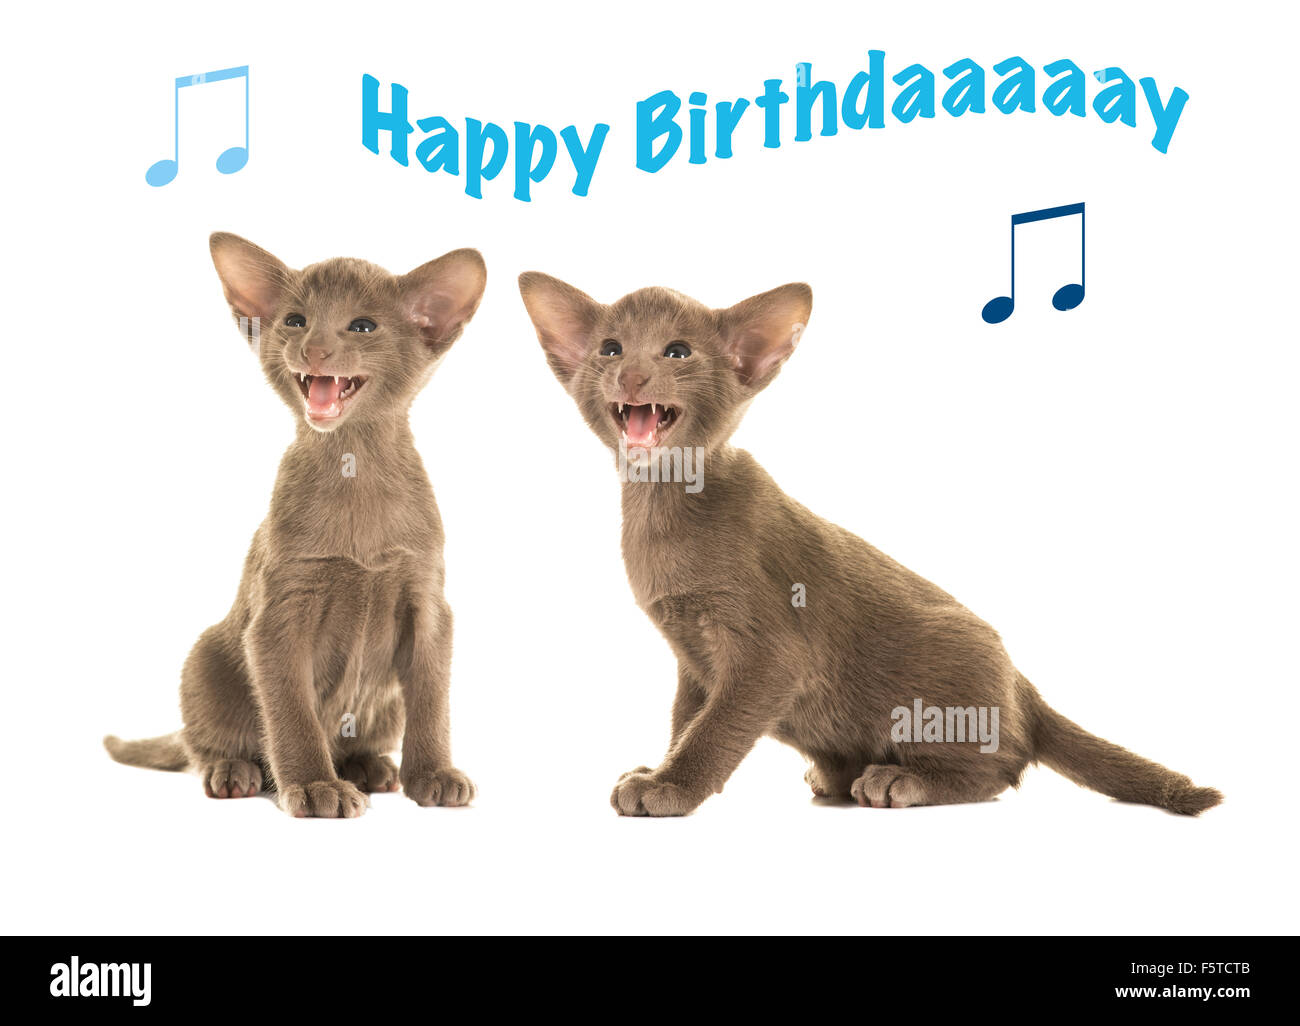 Birthday card with two singing siamese baby cats Stock Photo